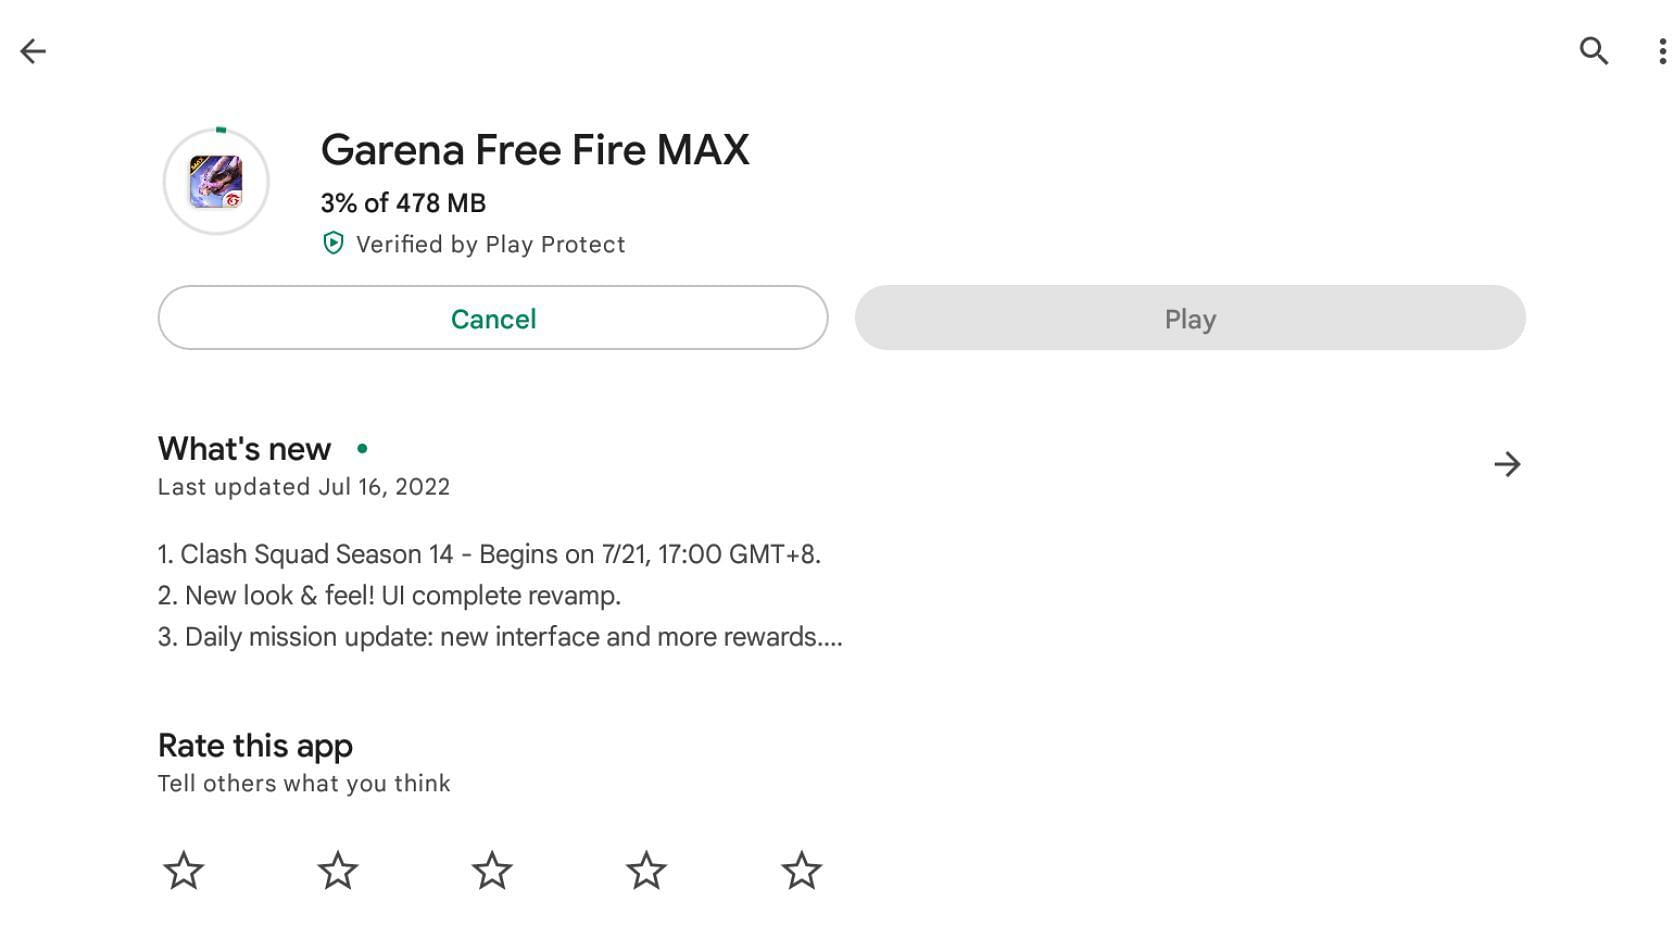 Browse Free Fire MAX in the Play store (Image via BlueStacks)